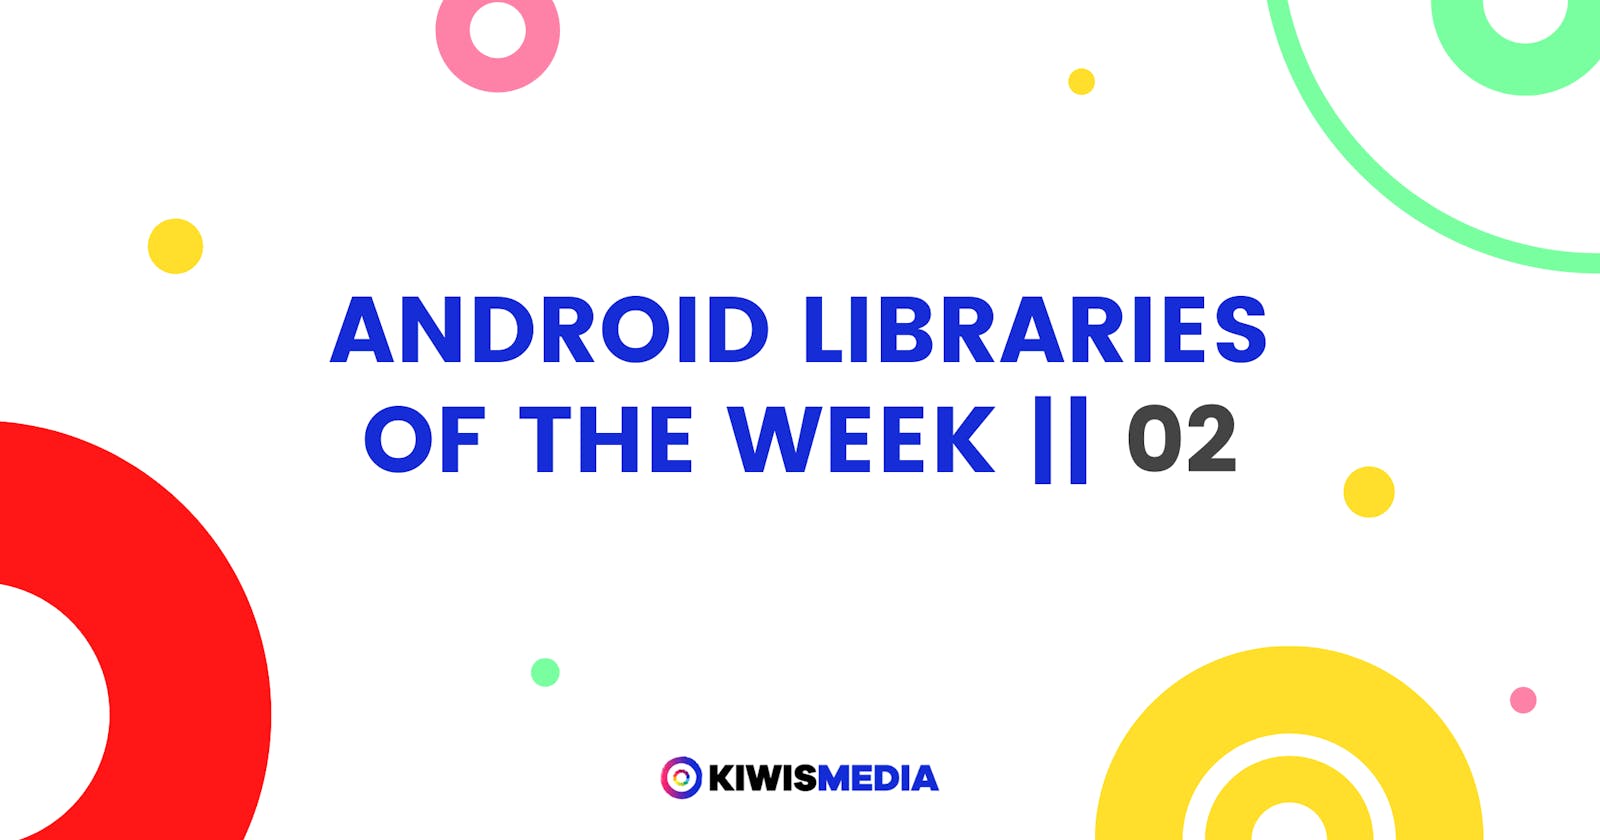 Android Libraries of the Week || 02